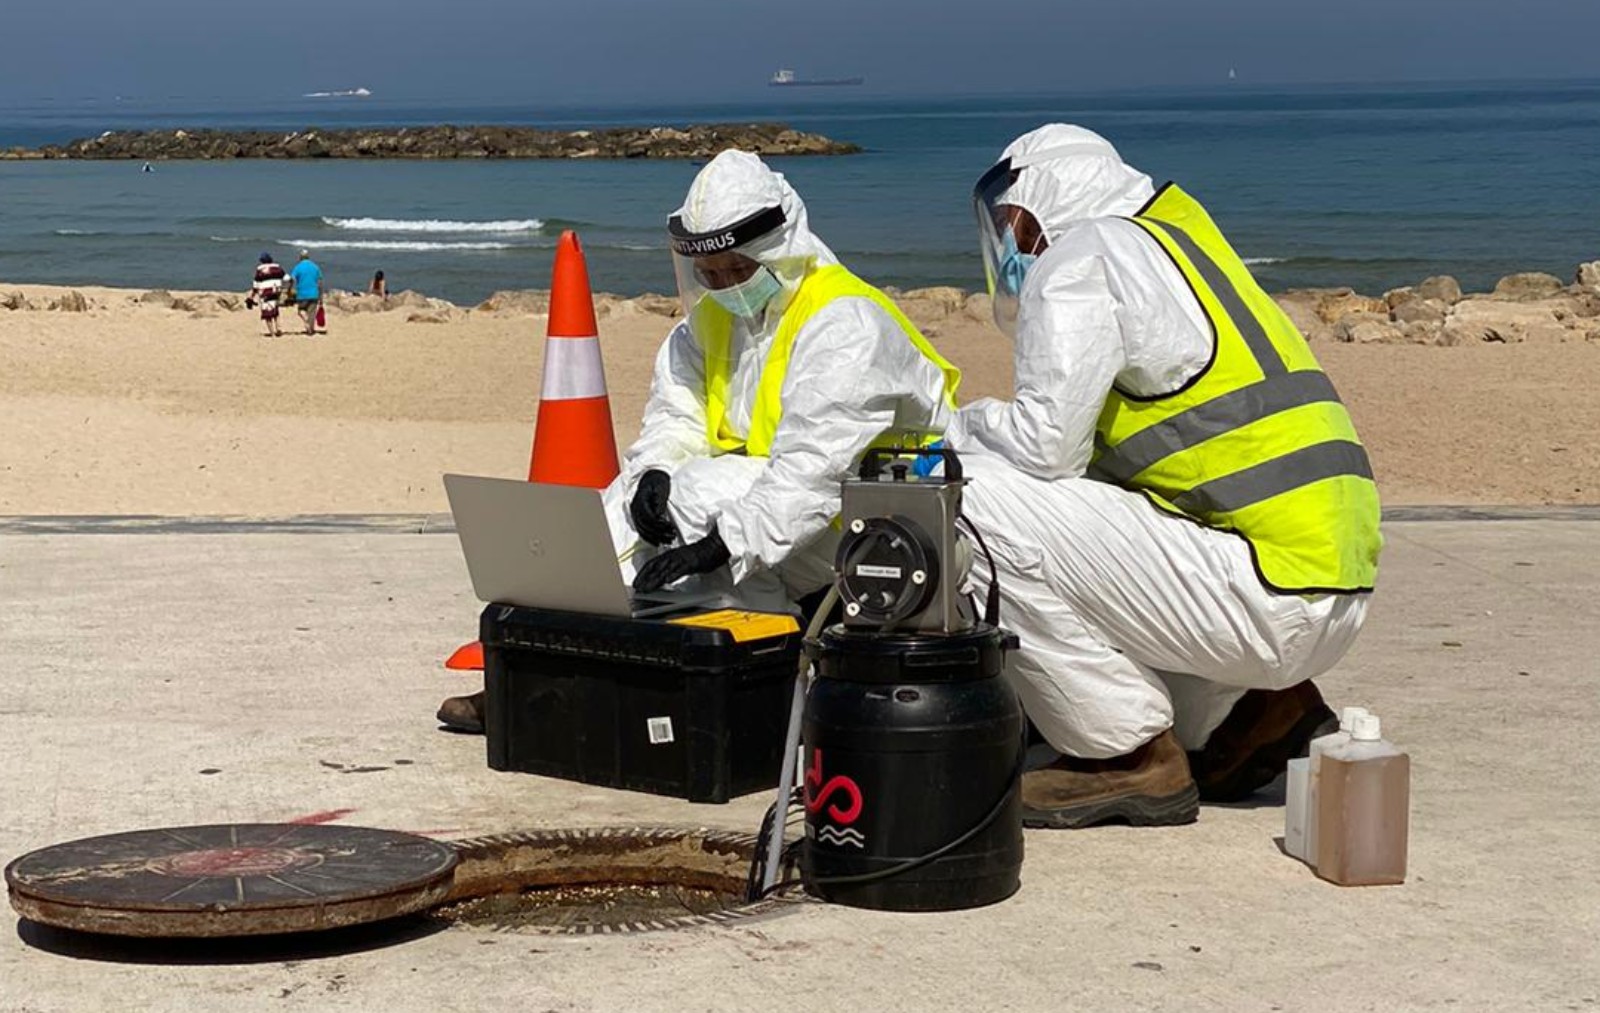 Kando took sewage samples in Ashkelon to detect concentrations of Covid-19 infection. Photo courtesy of Kando